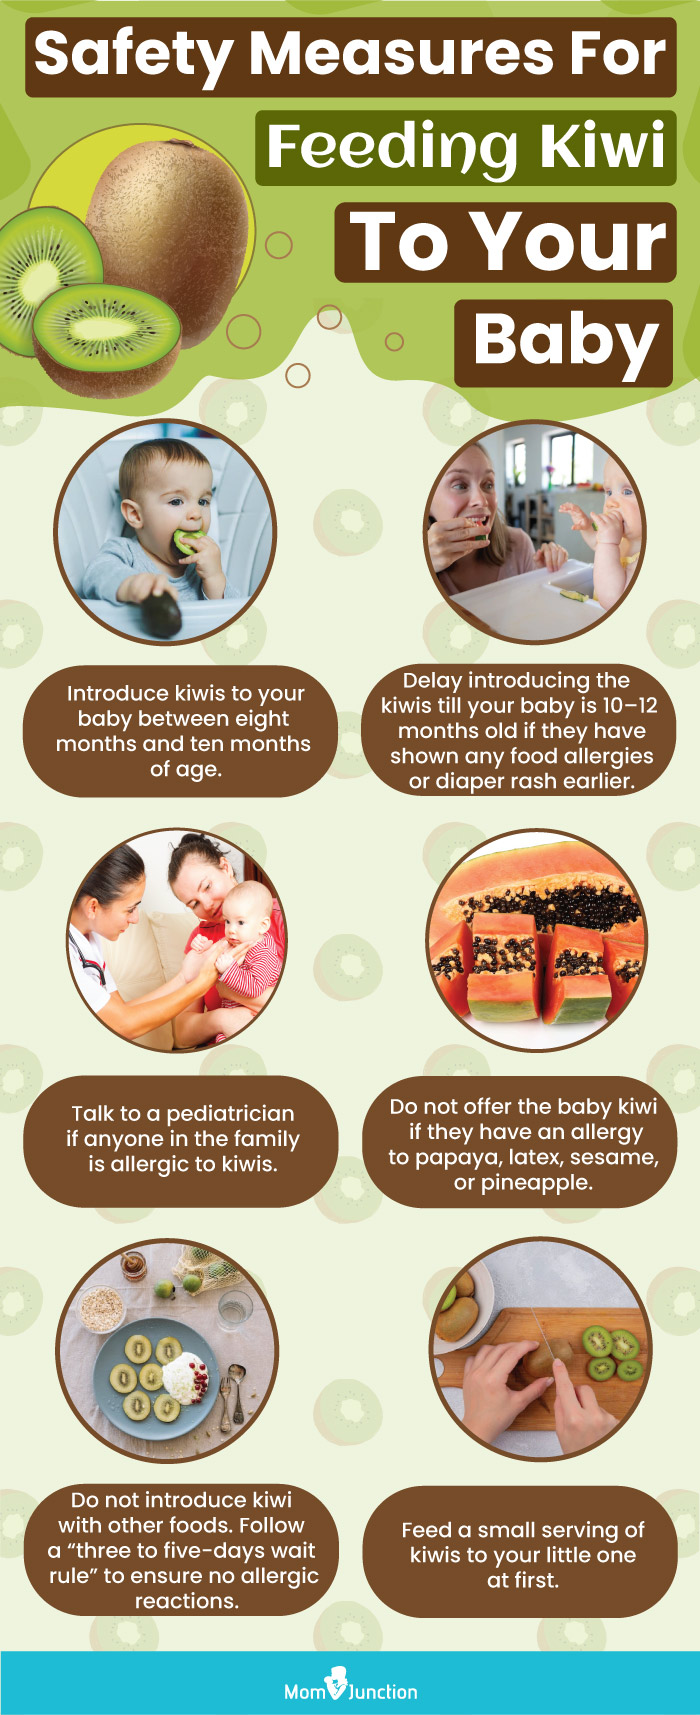 safety measures for feeding kiwi to your baby (infographic)